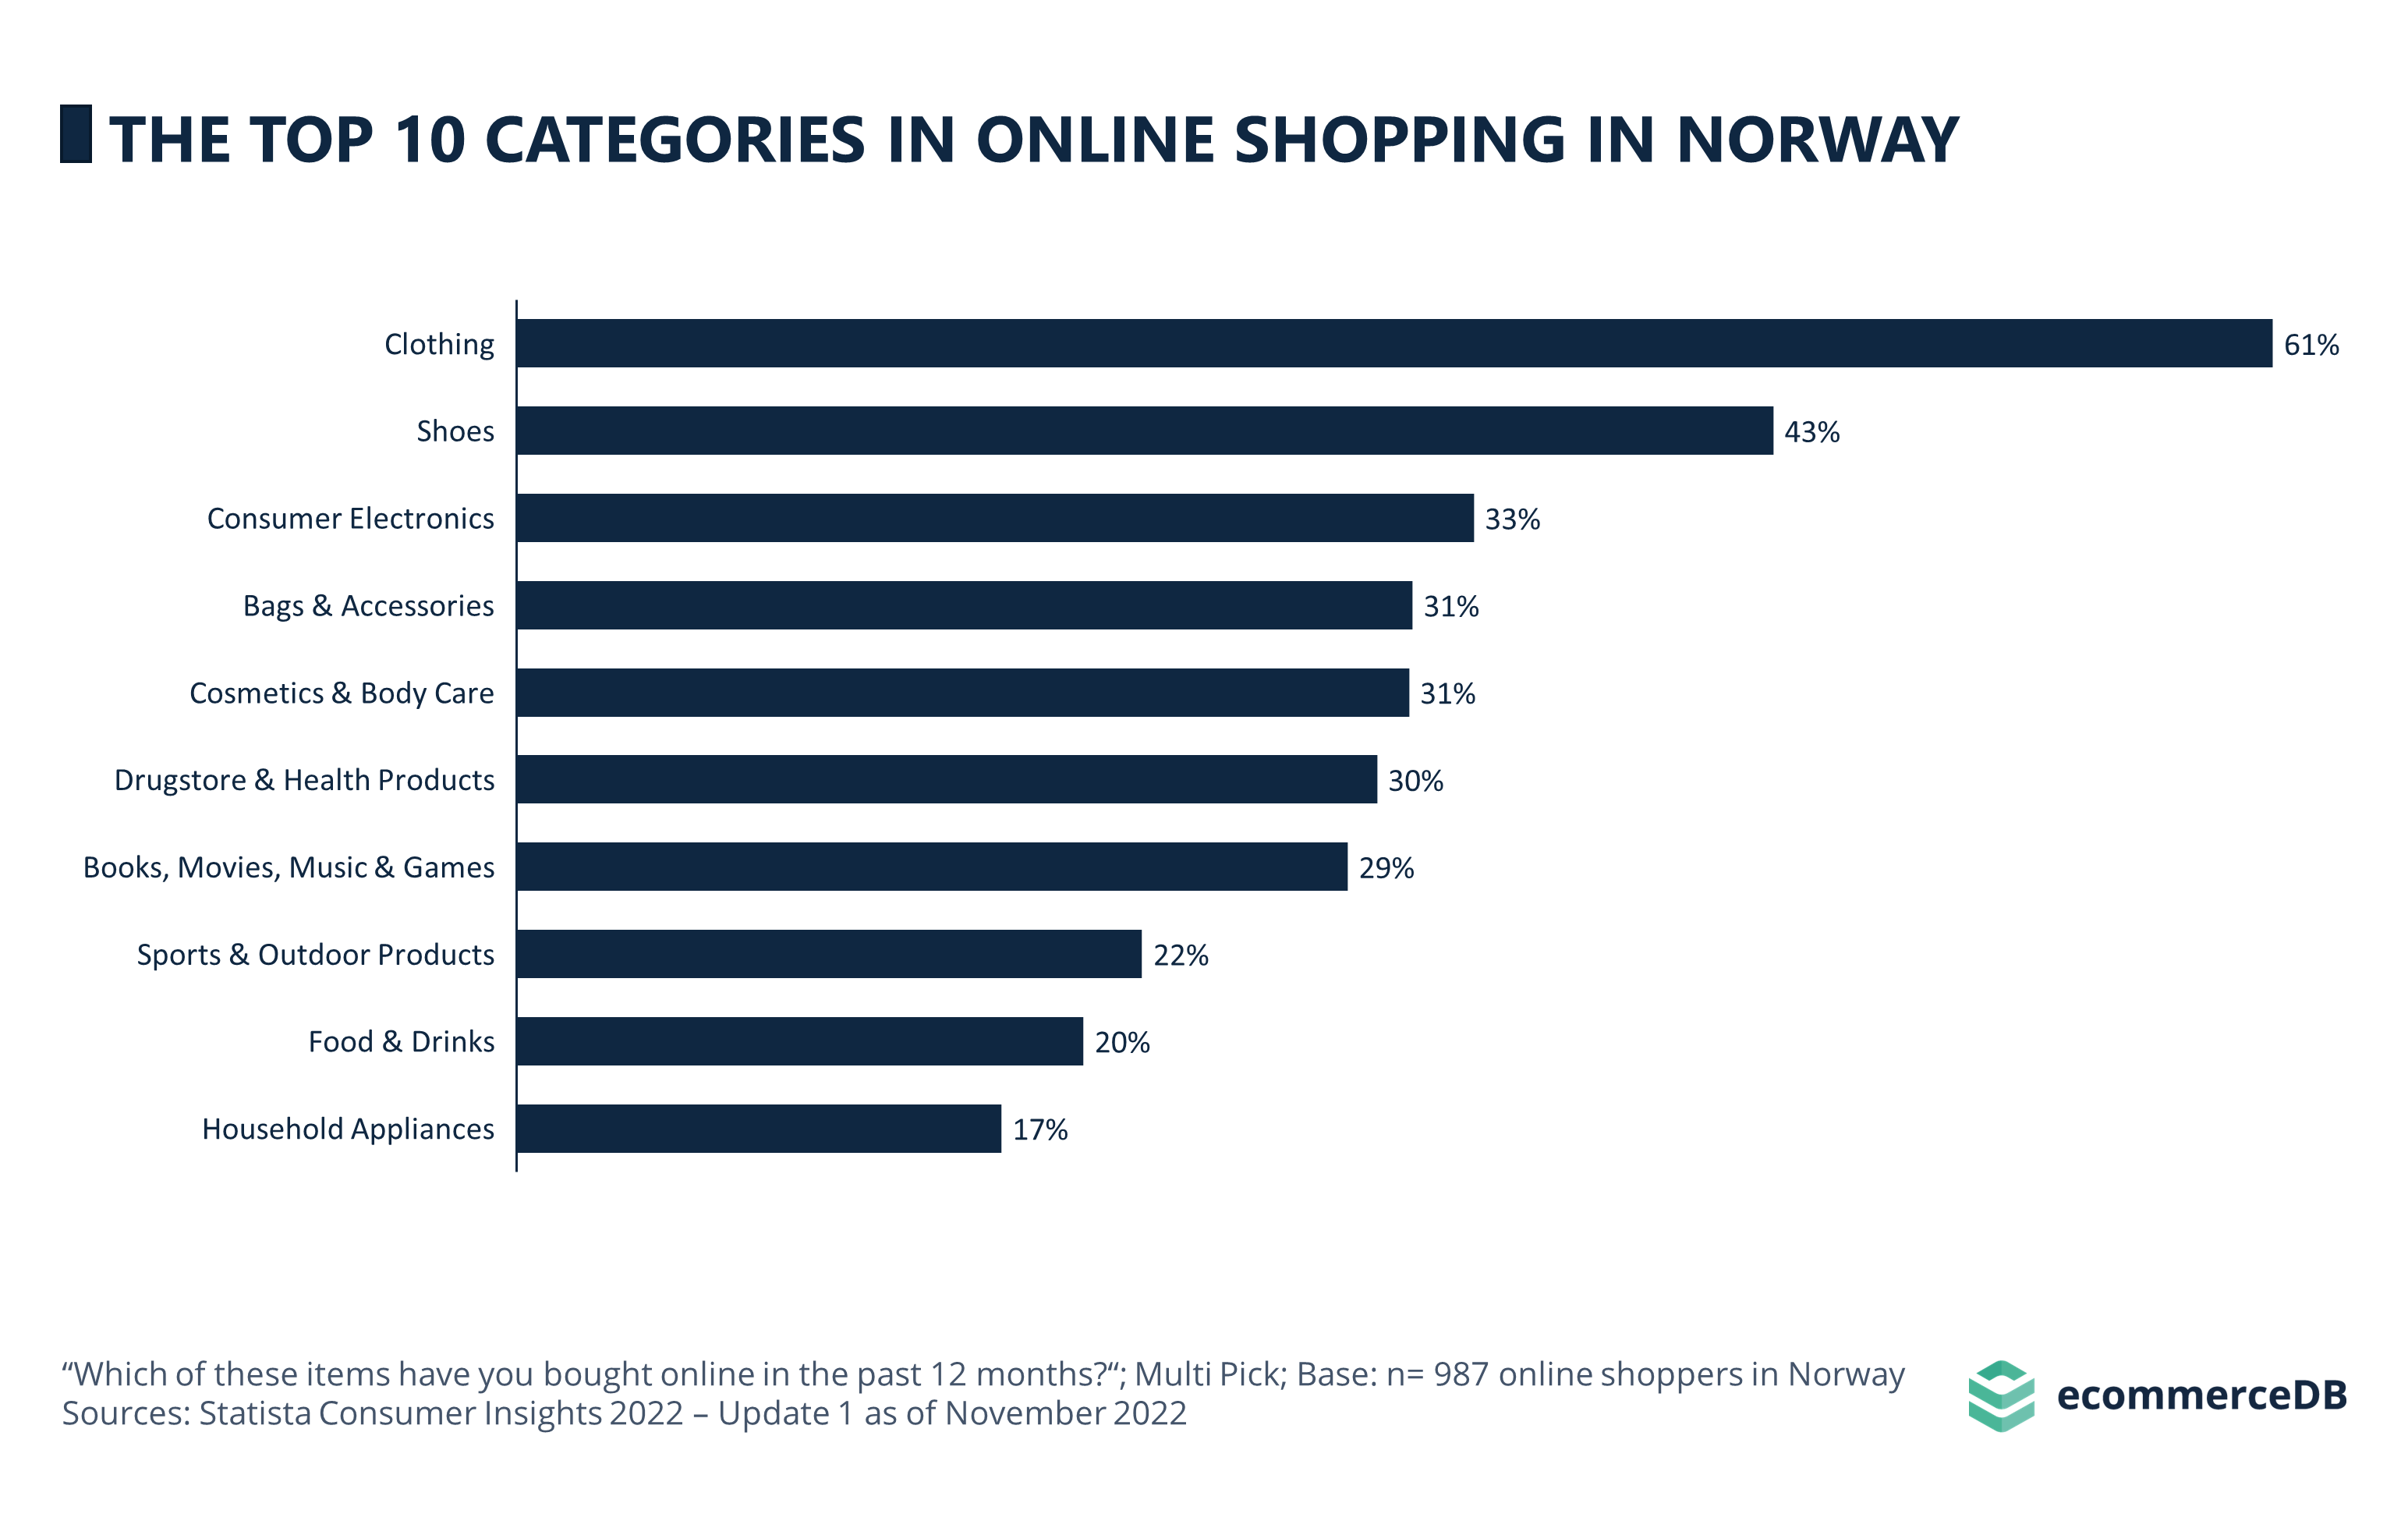 THE TOP 10 CATEGORIES IN ONLINE SHOPPING IN NORWAY